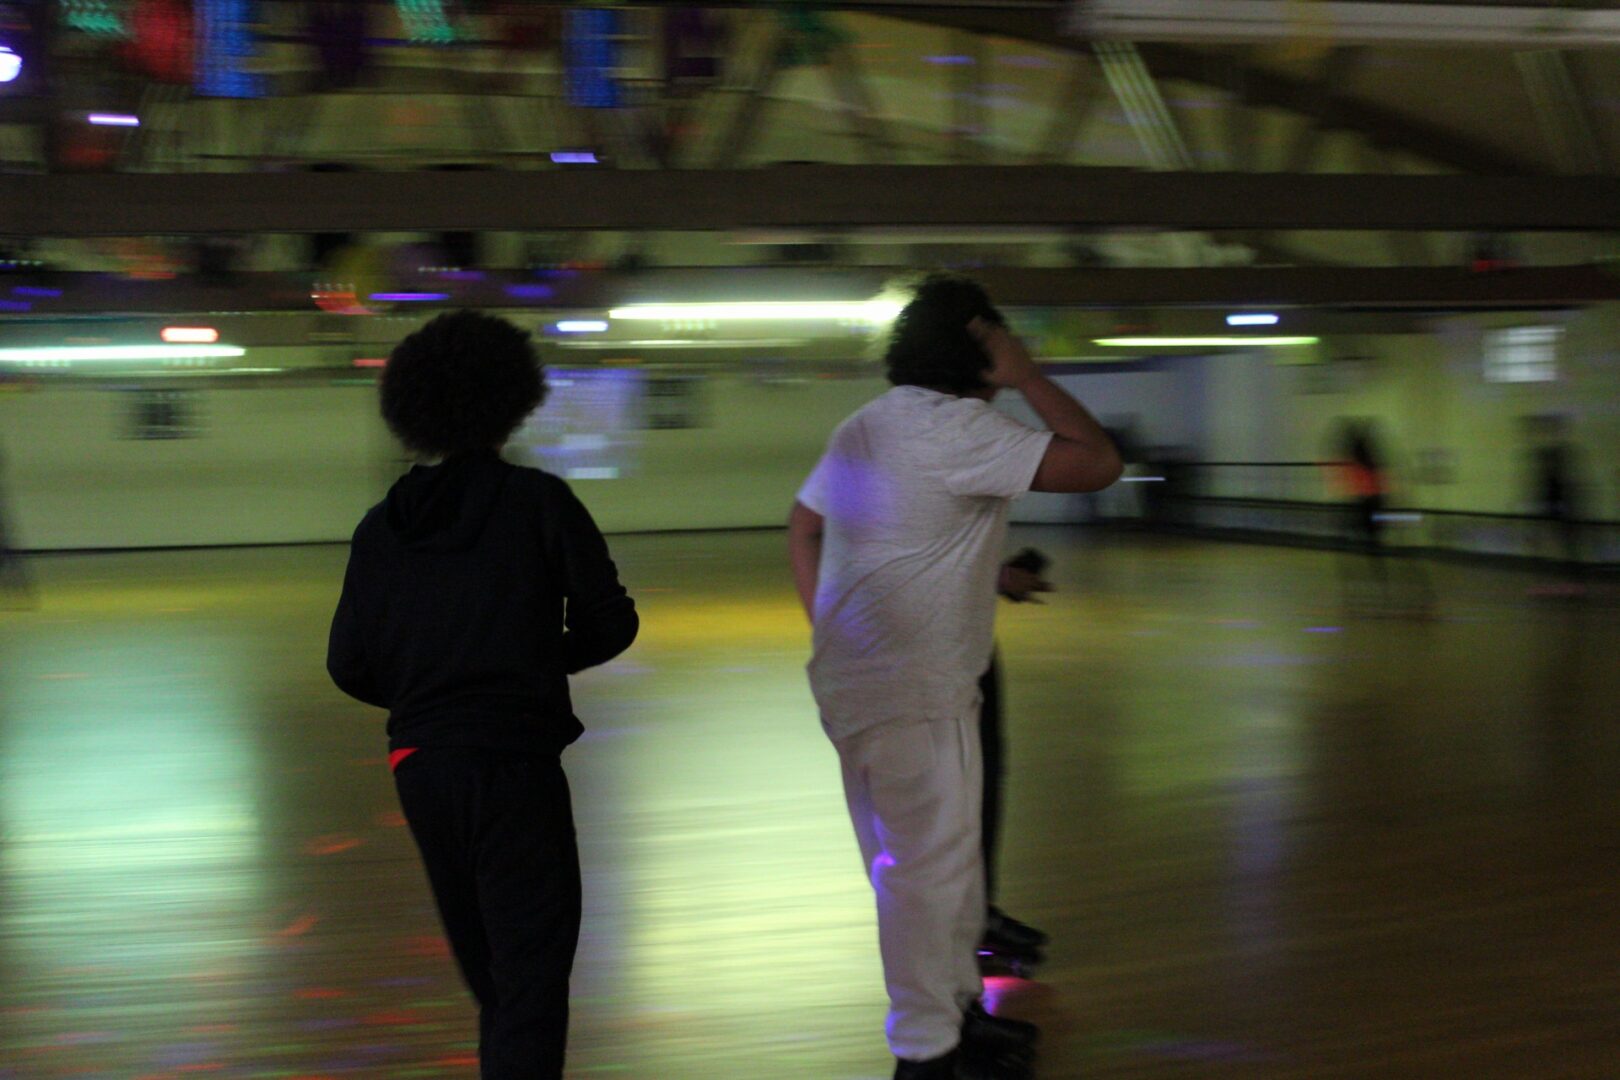 Three individuals skating on our roller rink